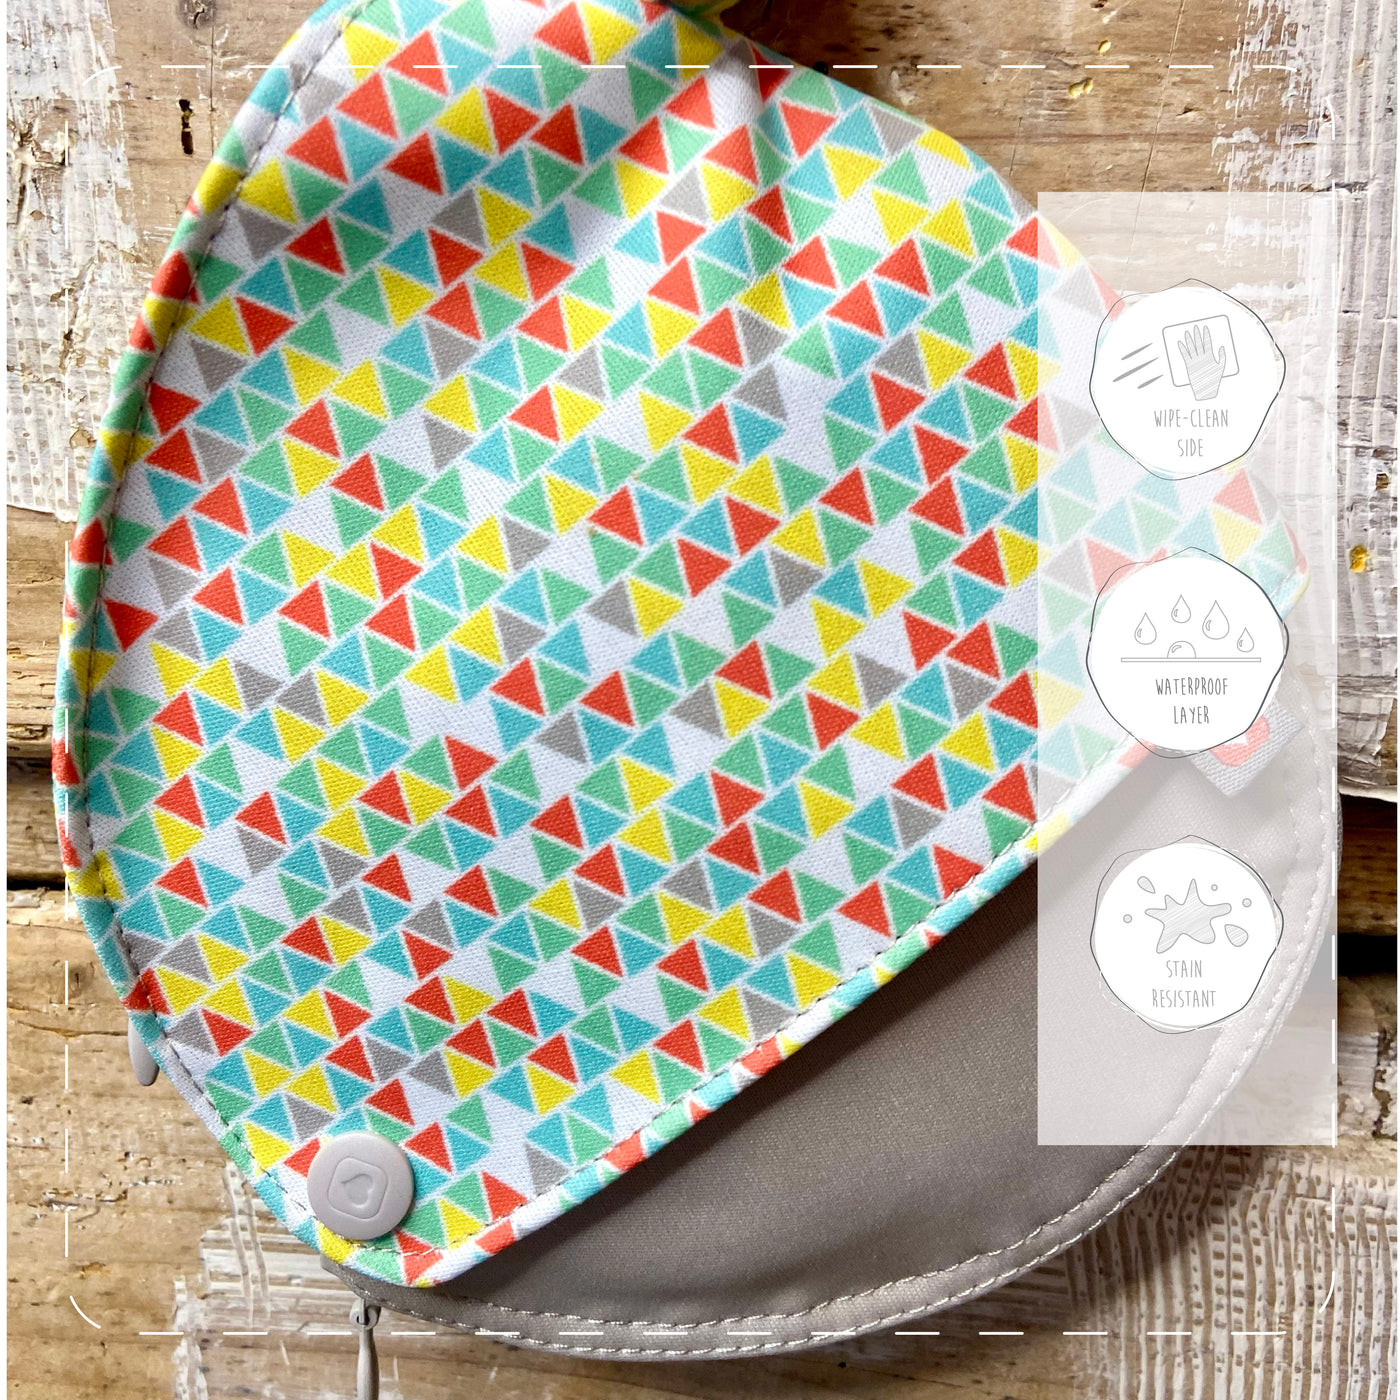 Teardrop Wet/Dry Zipp able Reusable Breast Pad Storage Pouch - *Bag Only Pads Sold Separatelya